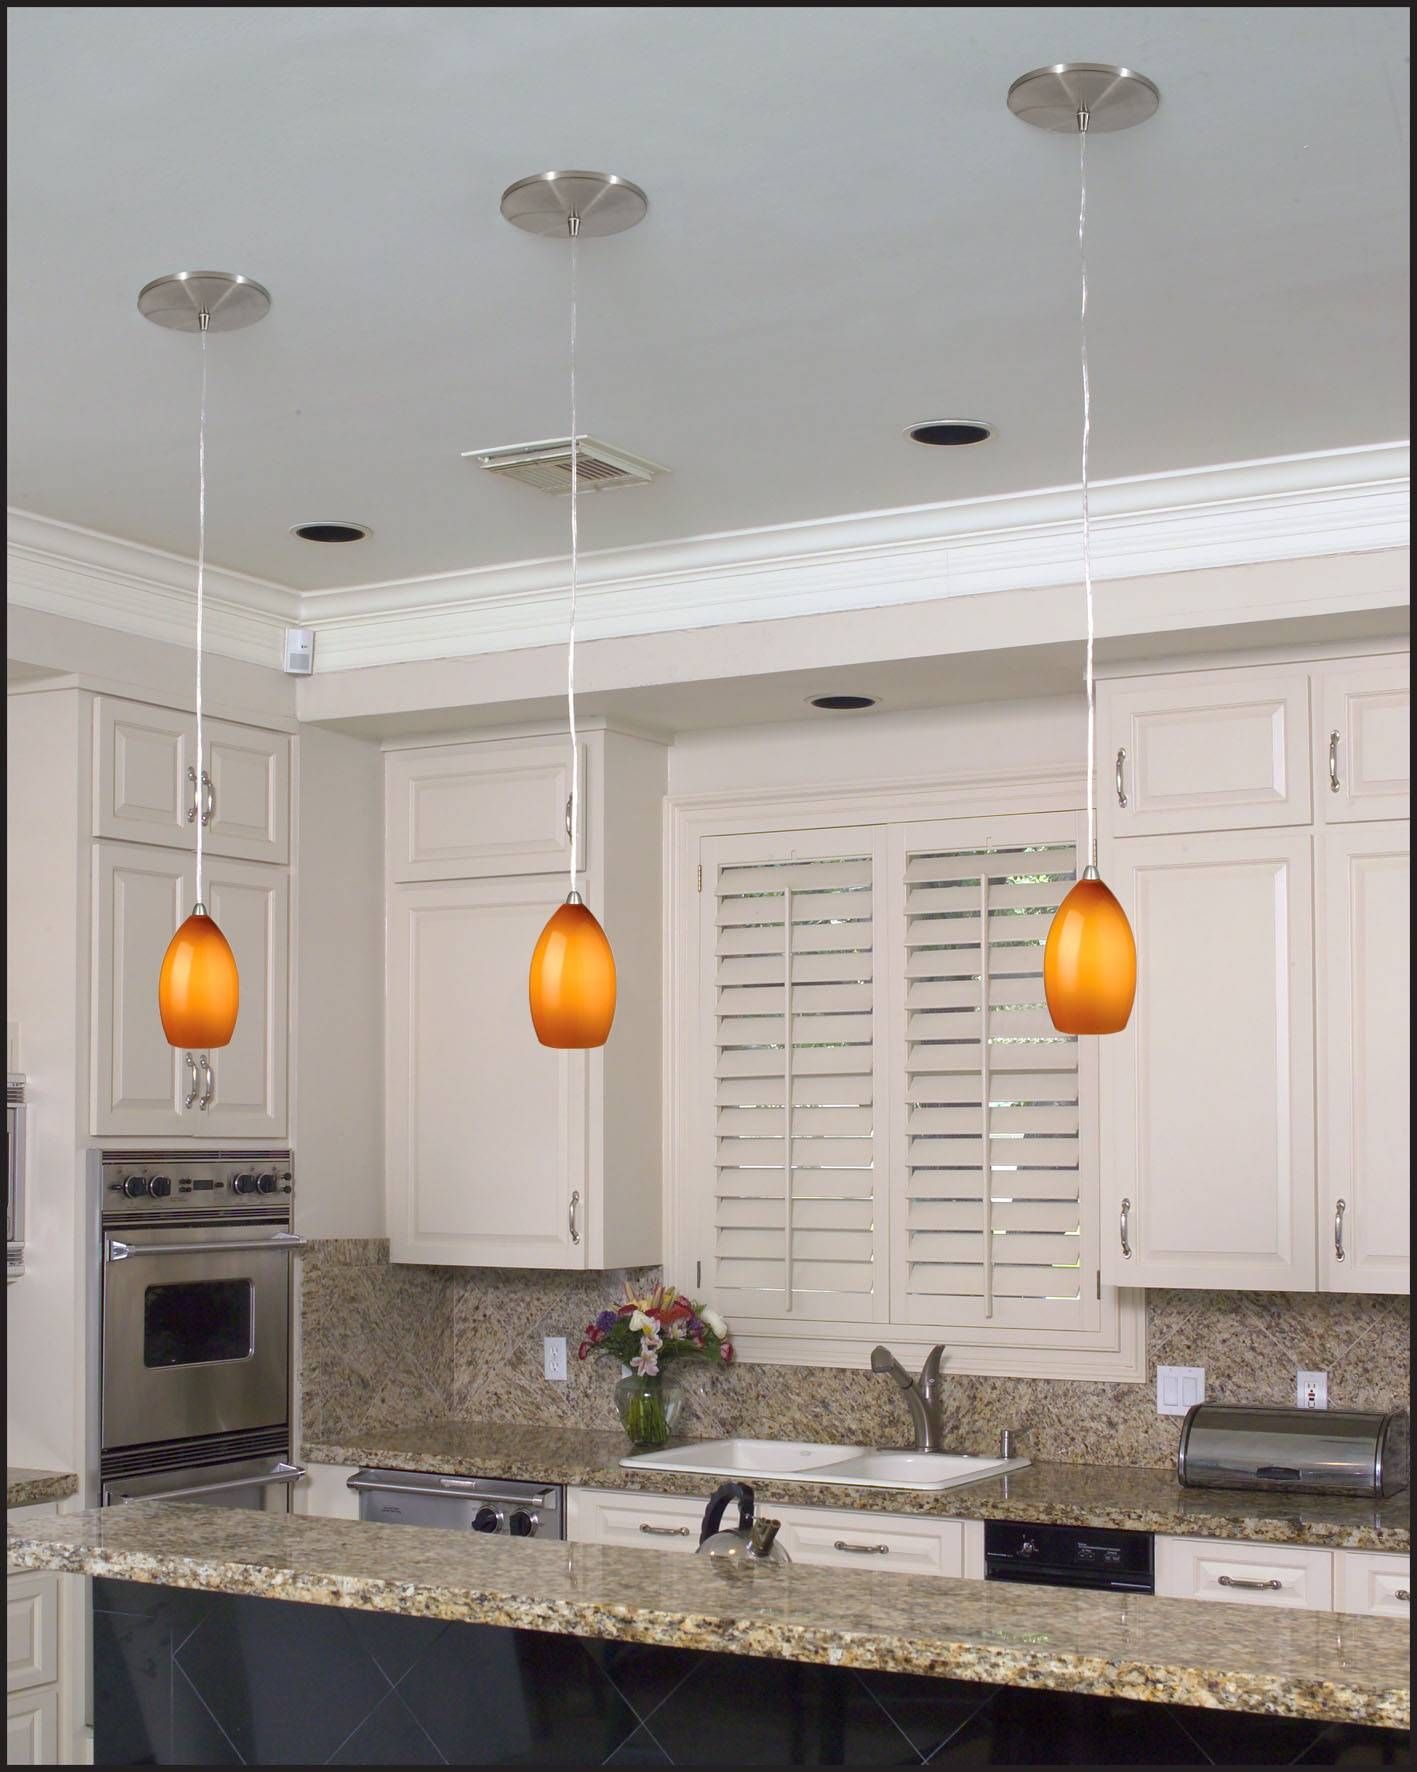 Convert A Recessed Light To A Pendant | Tribune Content Agency Pertaining To Recessed Lighting Pendants (View 11 of 15)